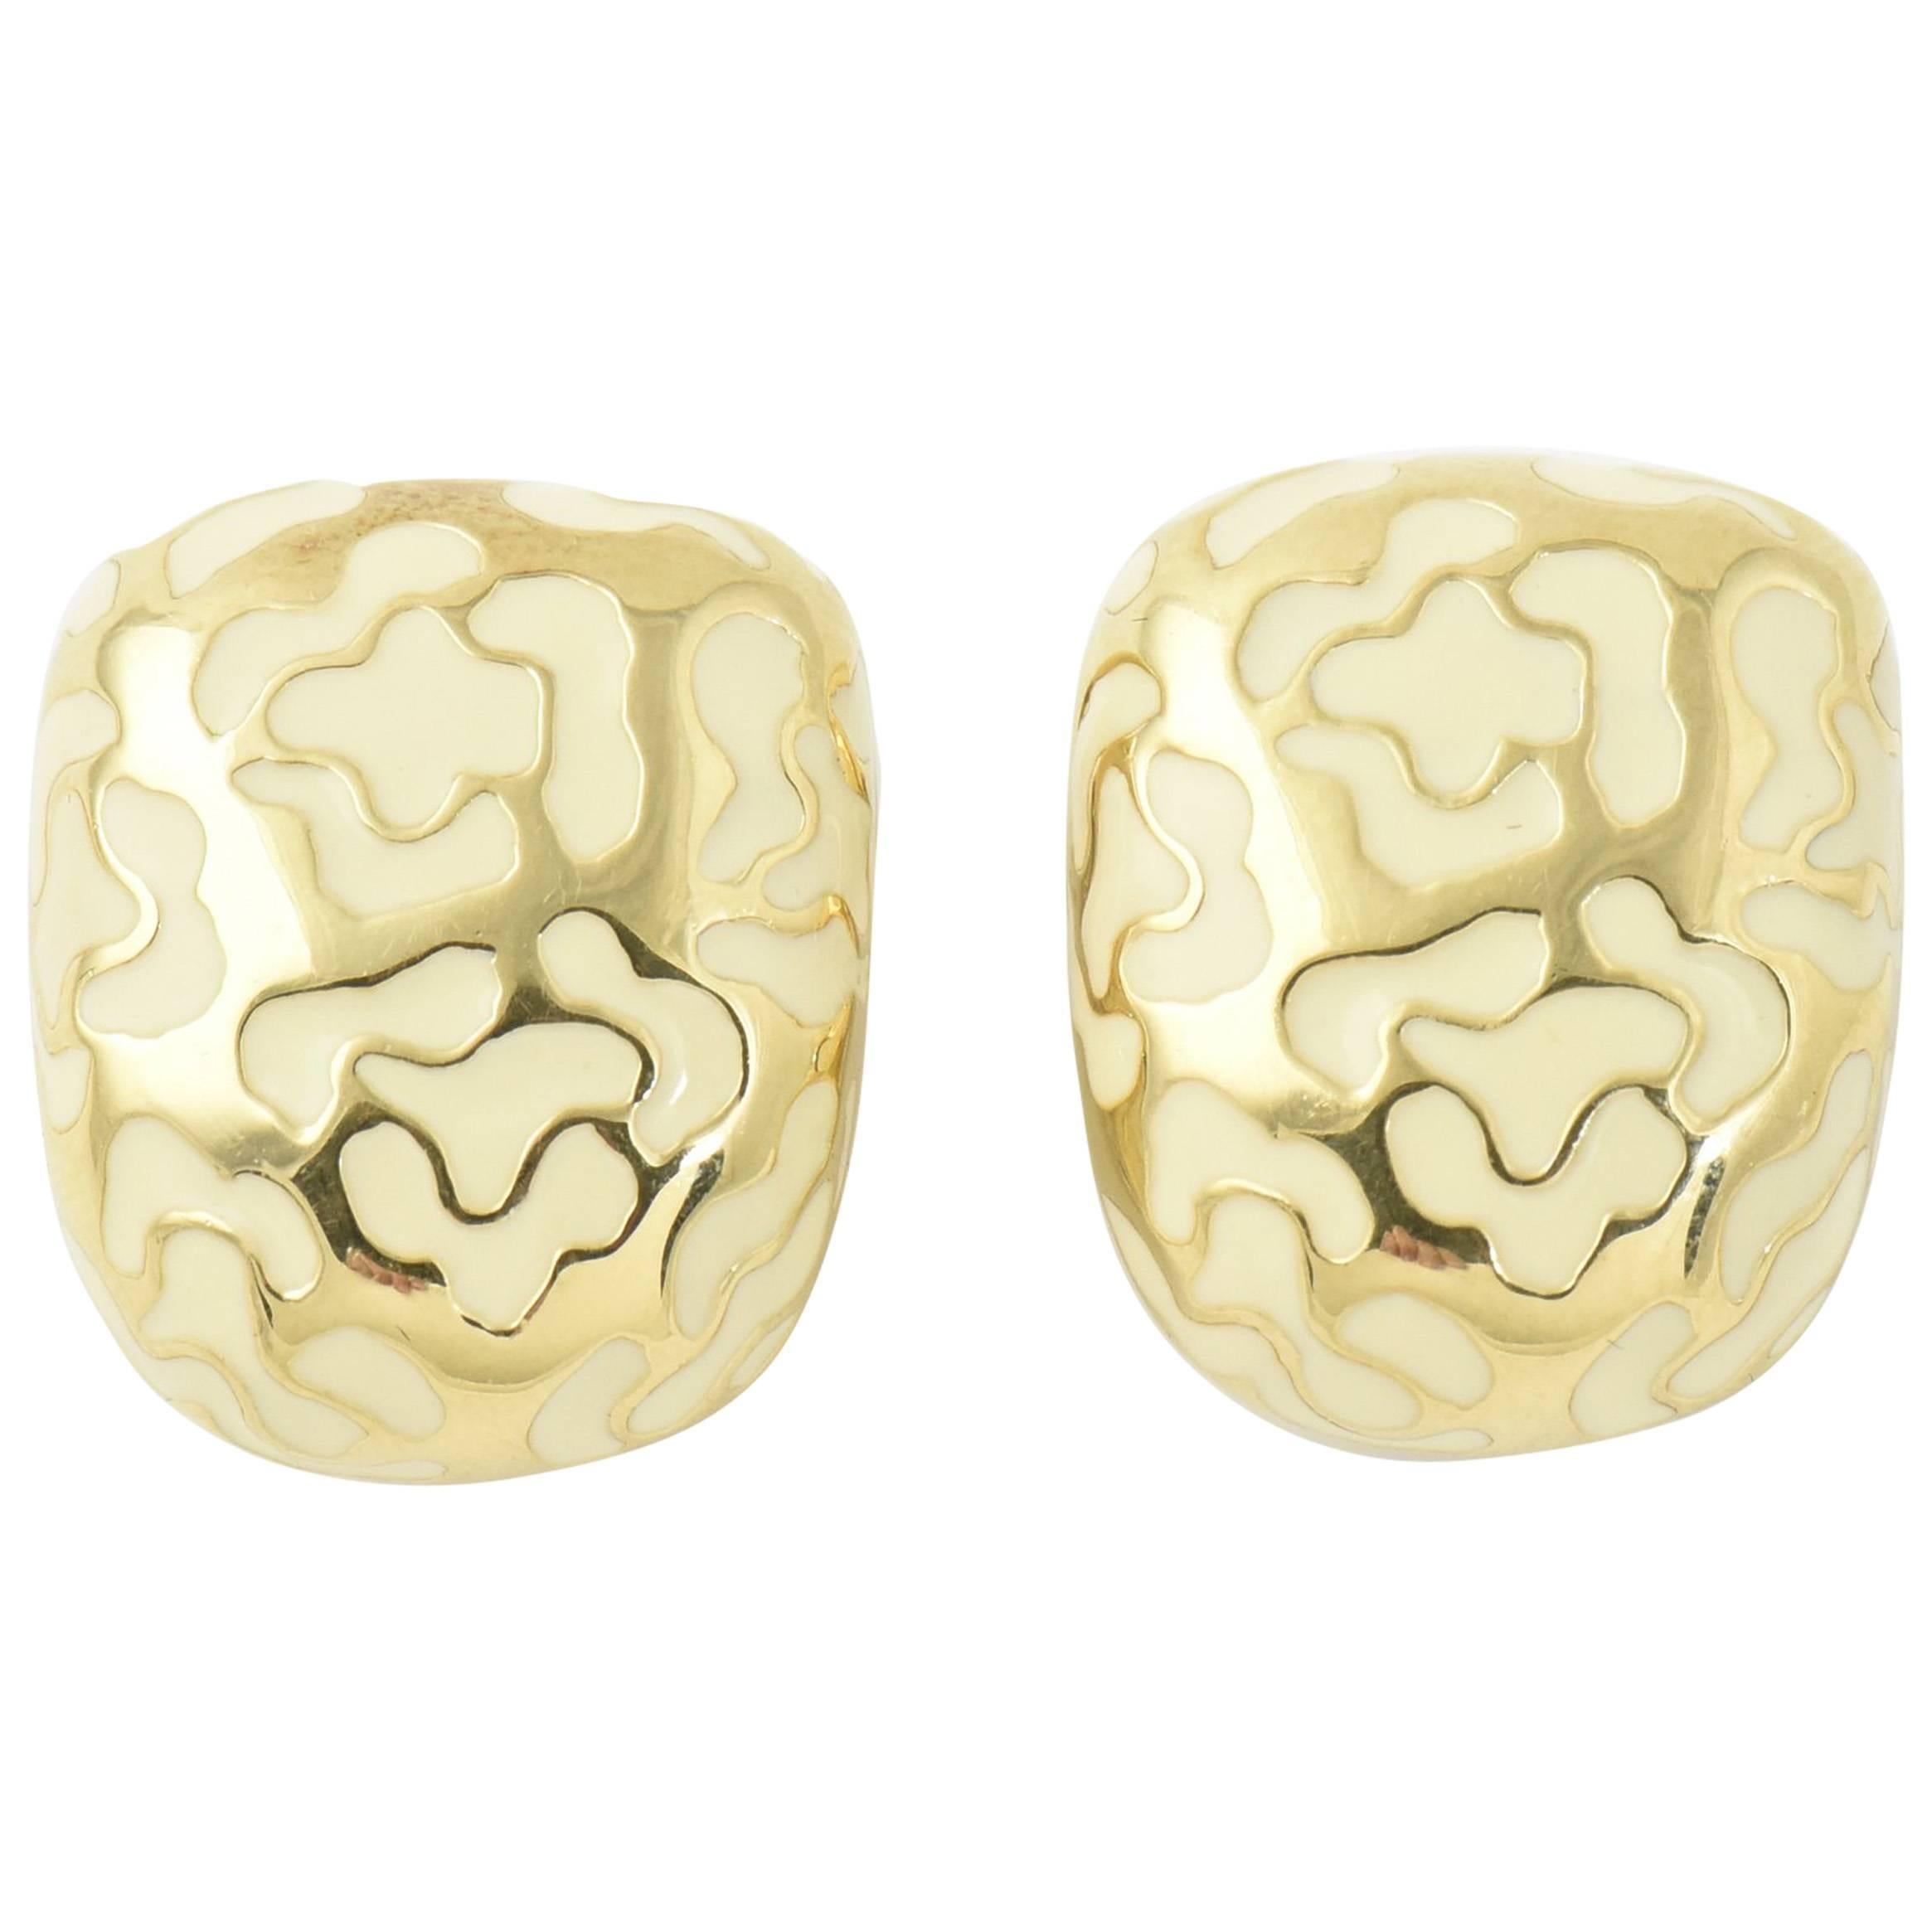 Roberto Coin Enamel and Gold Flower Clip Earrings